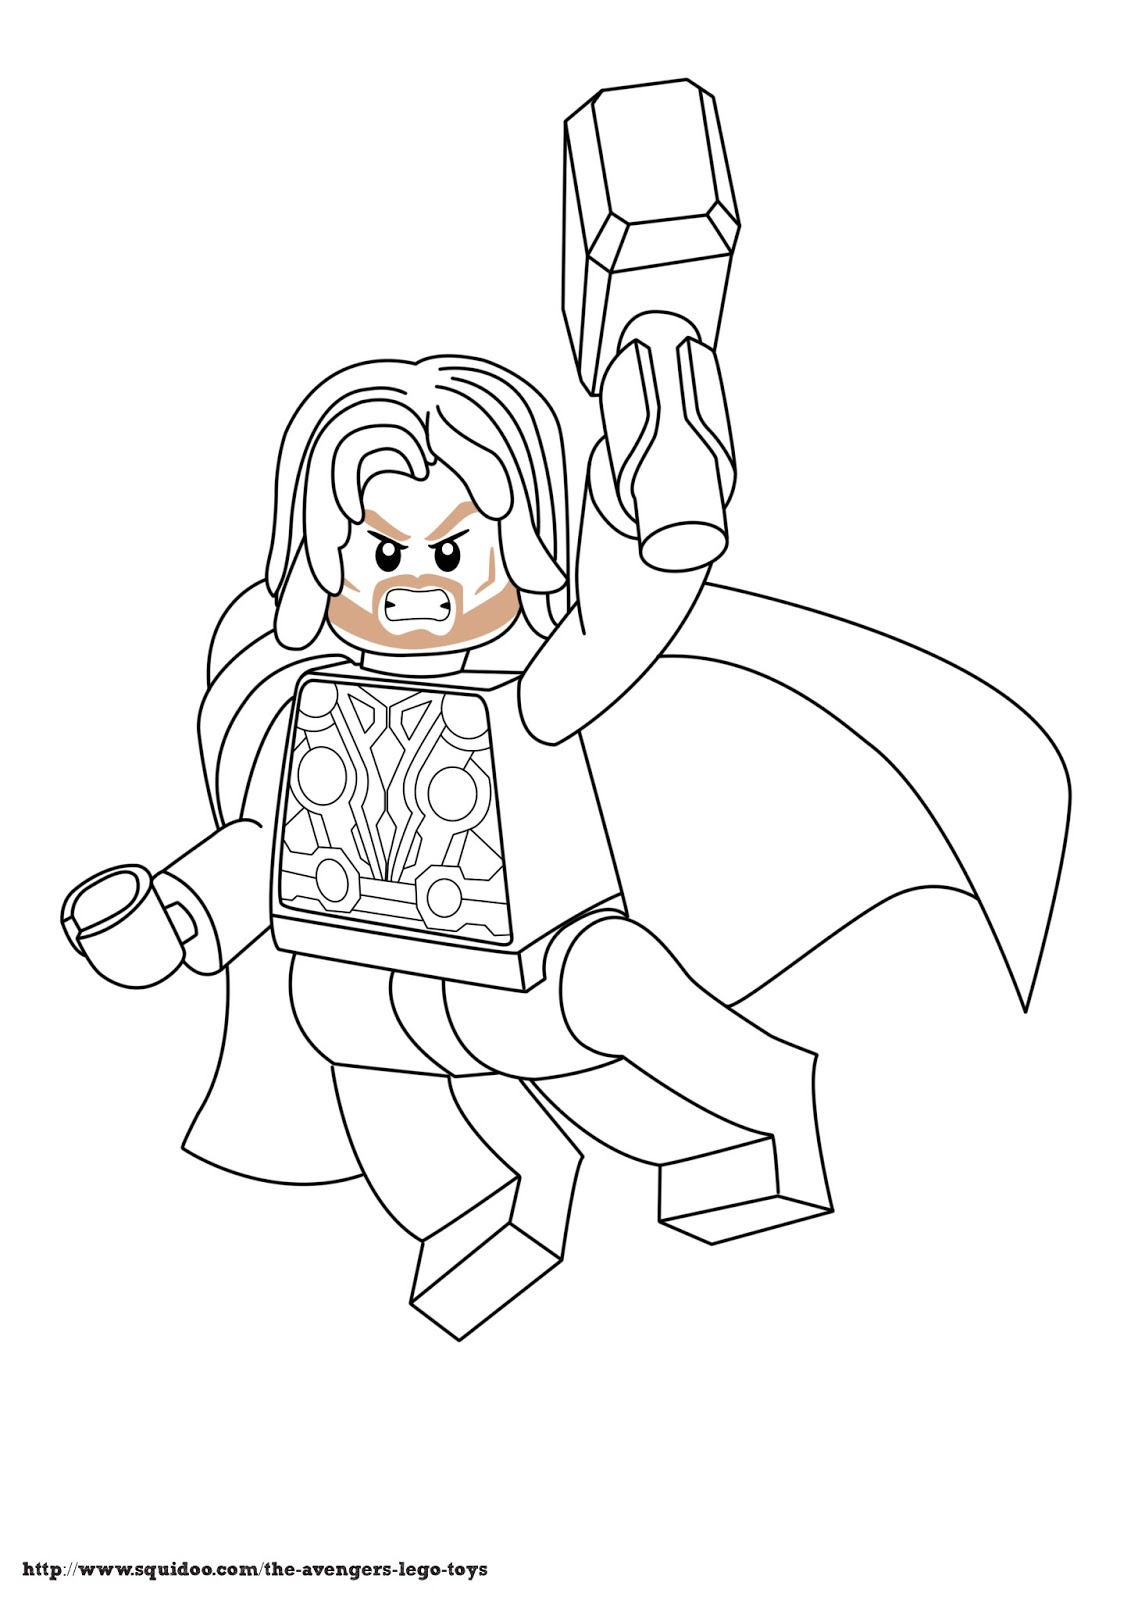 Lego Avengers Coloring Pages at GetColorings.com | Free printable